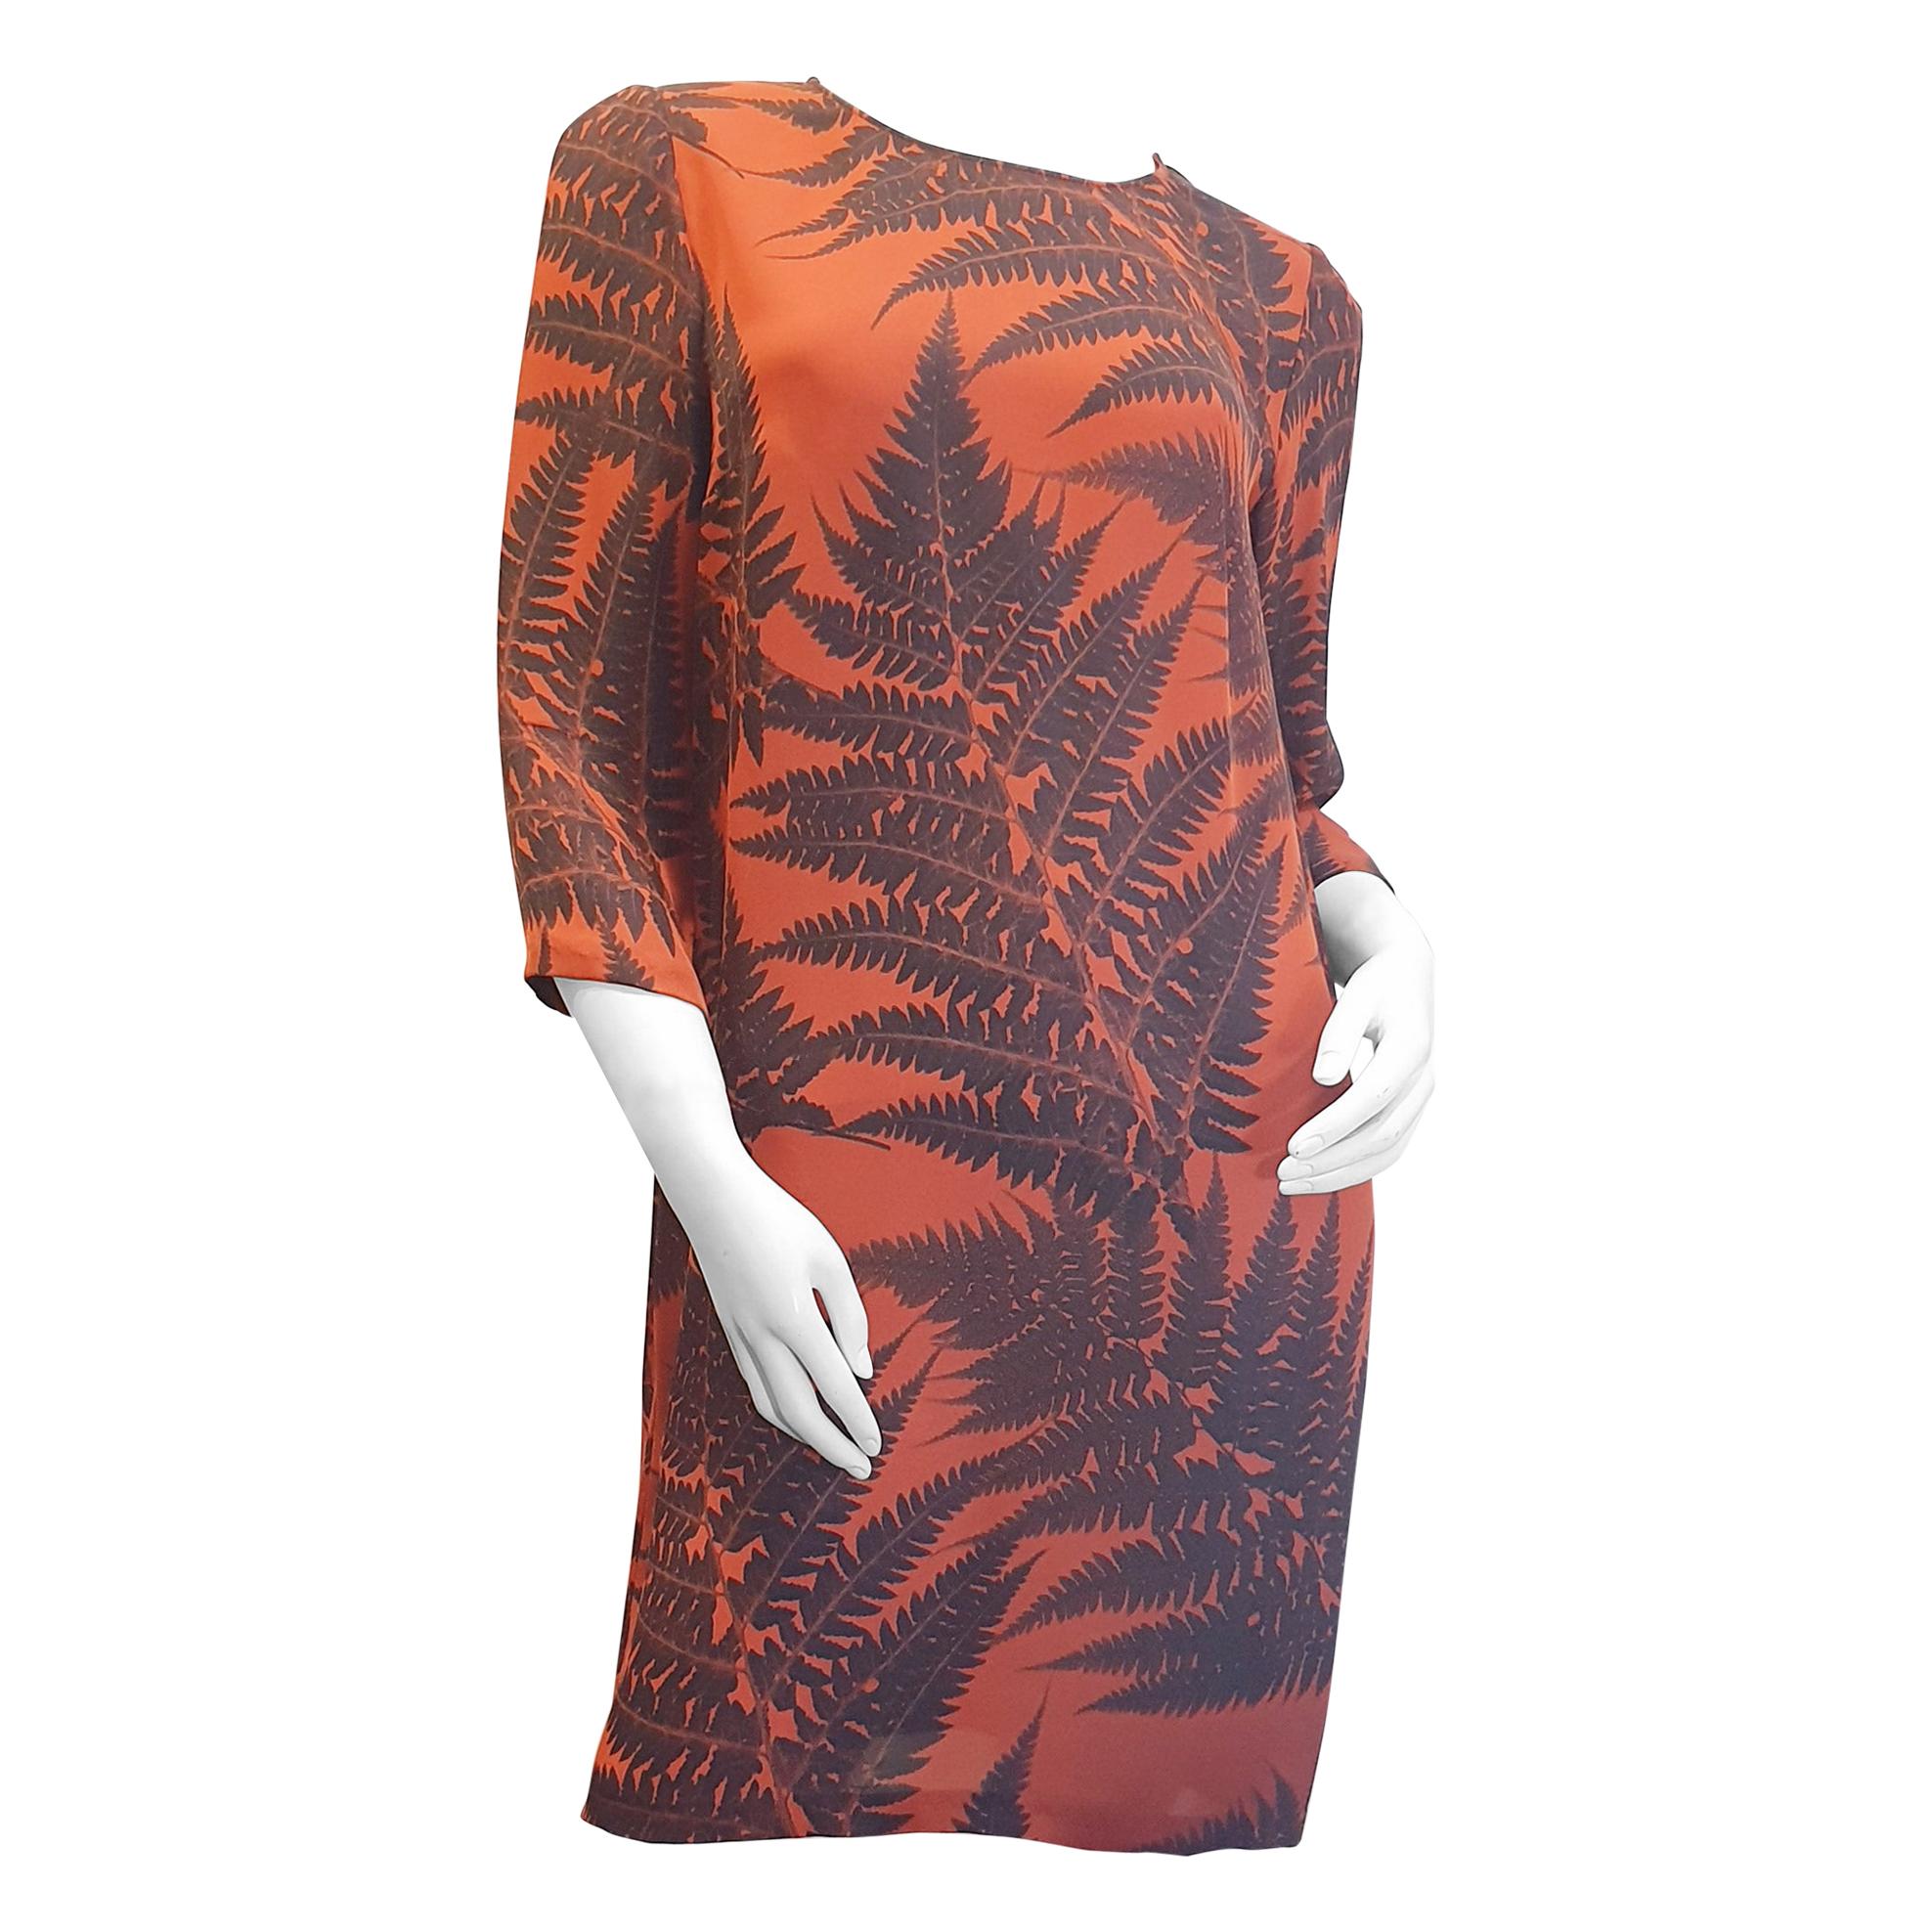 Stella McCartney silk tropical plant cocktail dress in Orange and marron colours For Sale